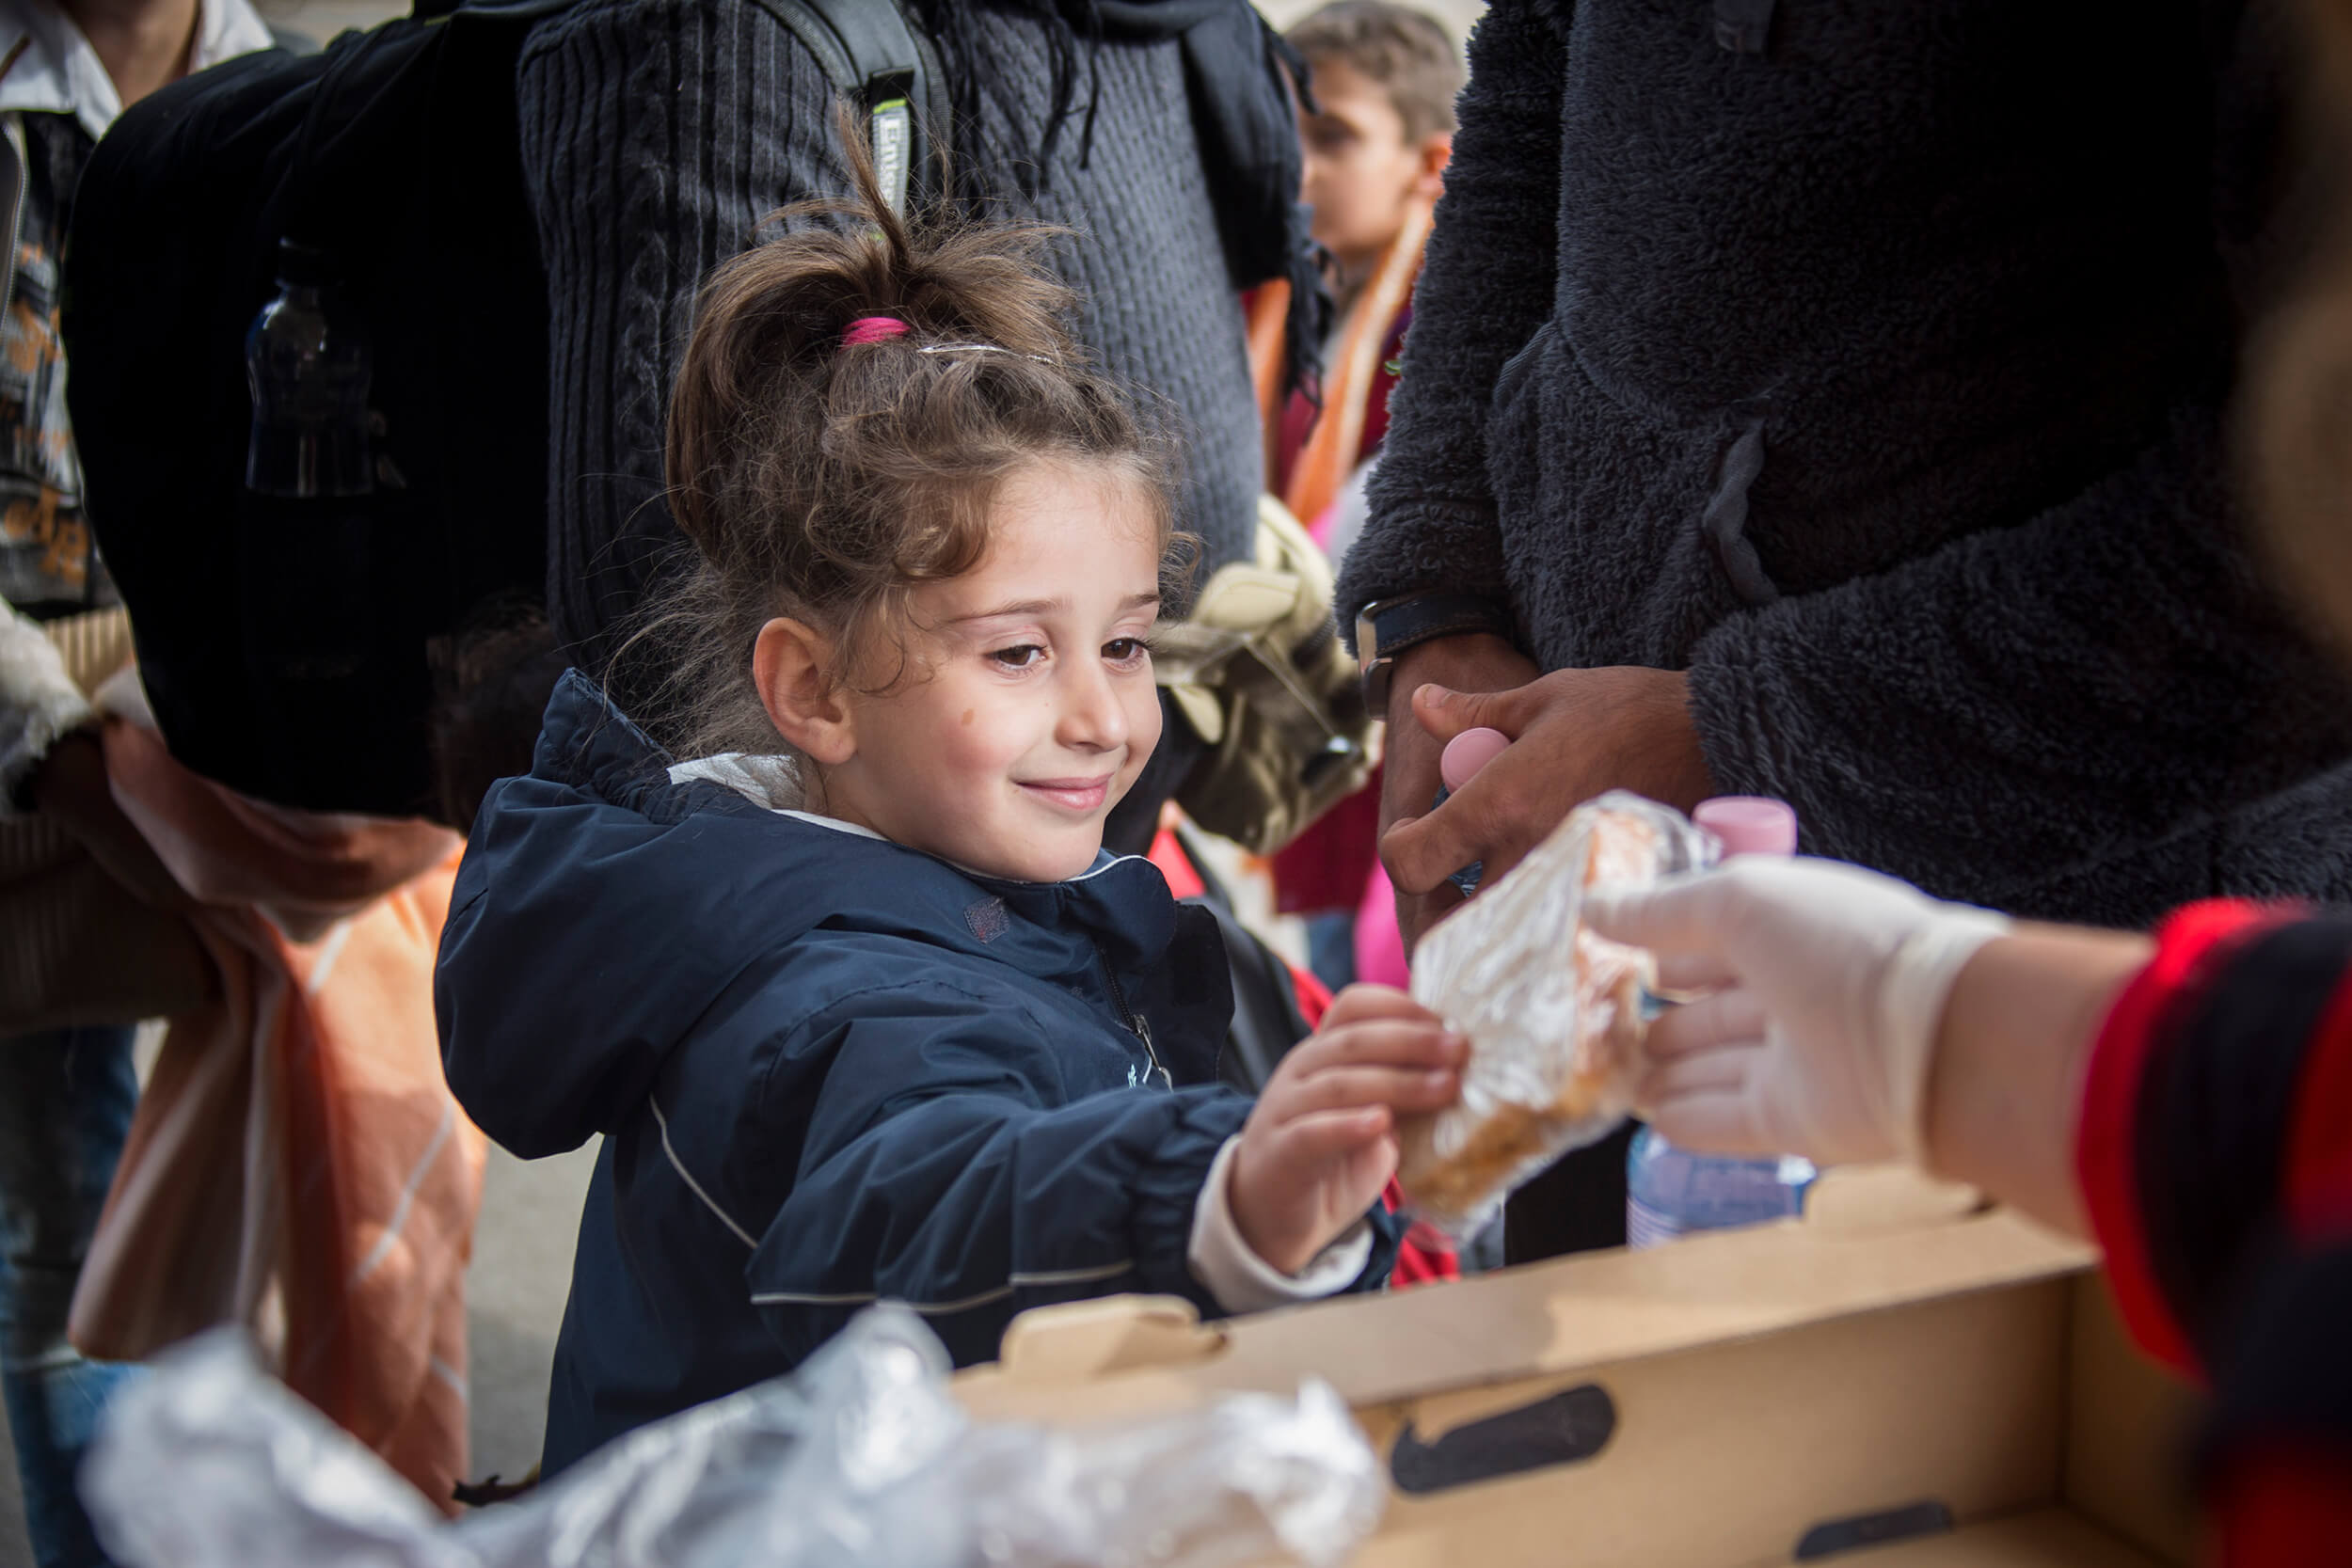  Hungaria. October 2015. Refugees from Syria, Afghanistan and Iraq arrive by train to the Hungarian border station Hegyeshalom. The Red Cross distribute food, water, clothes, shoes and other necessities. 